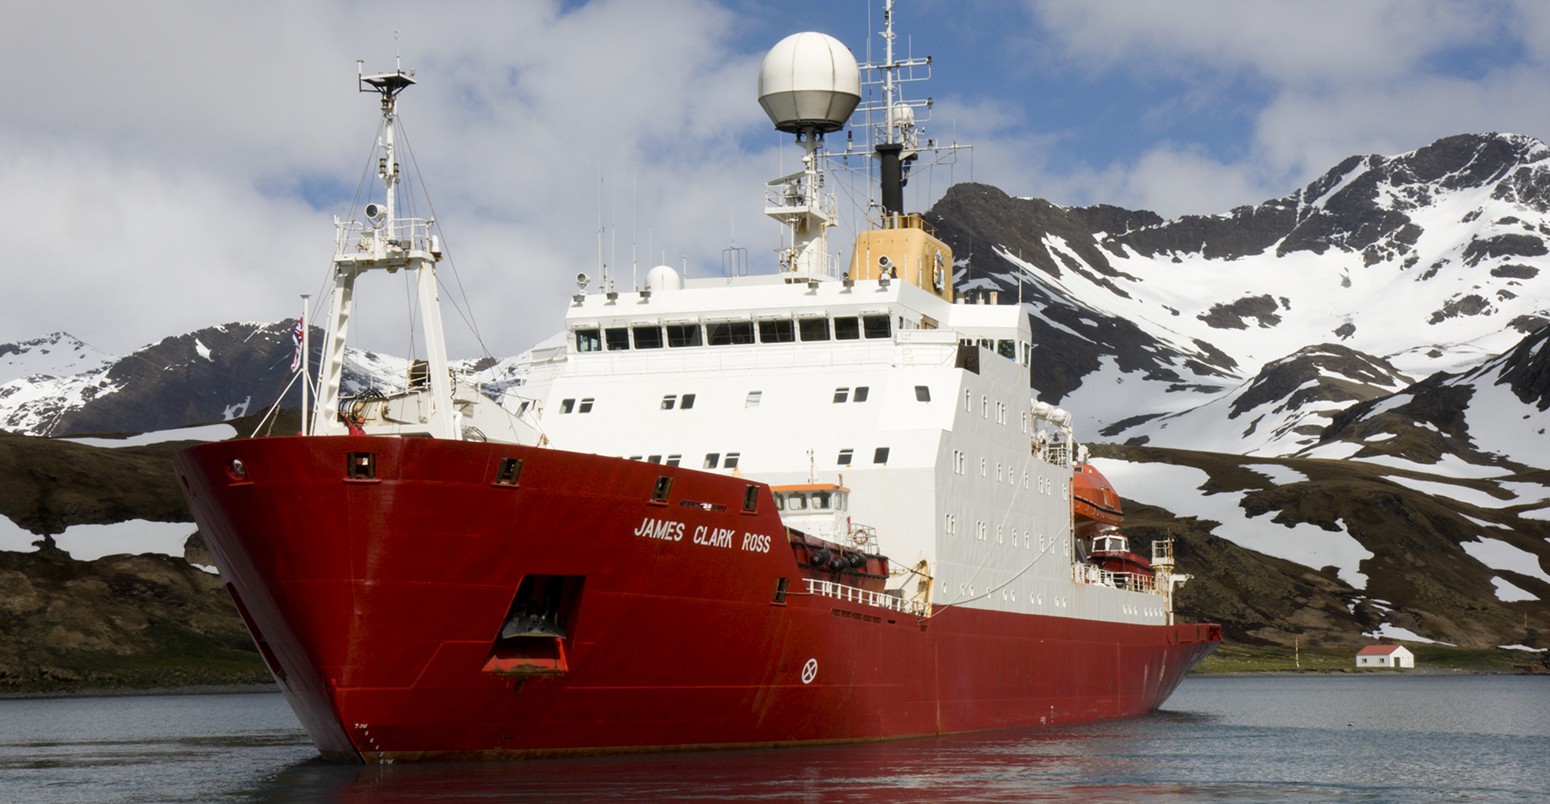 The RRS James Clark Ross, a marine research vessel, in South Georgia.